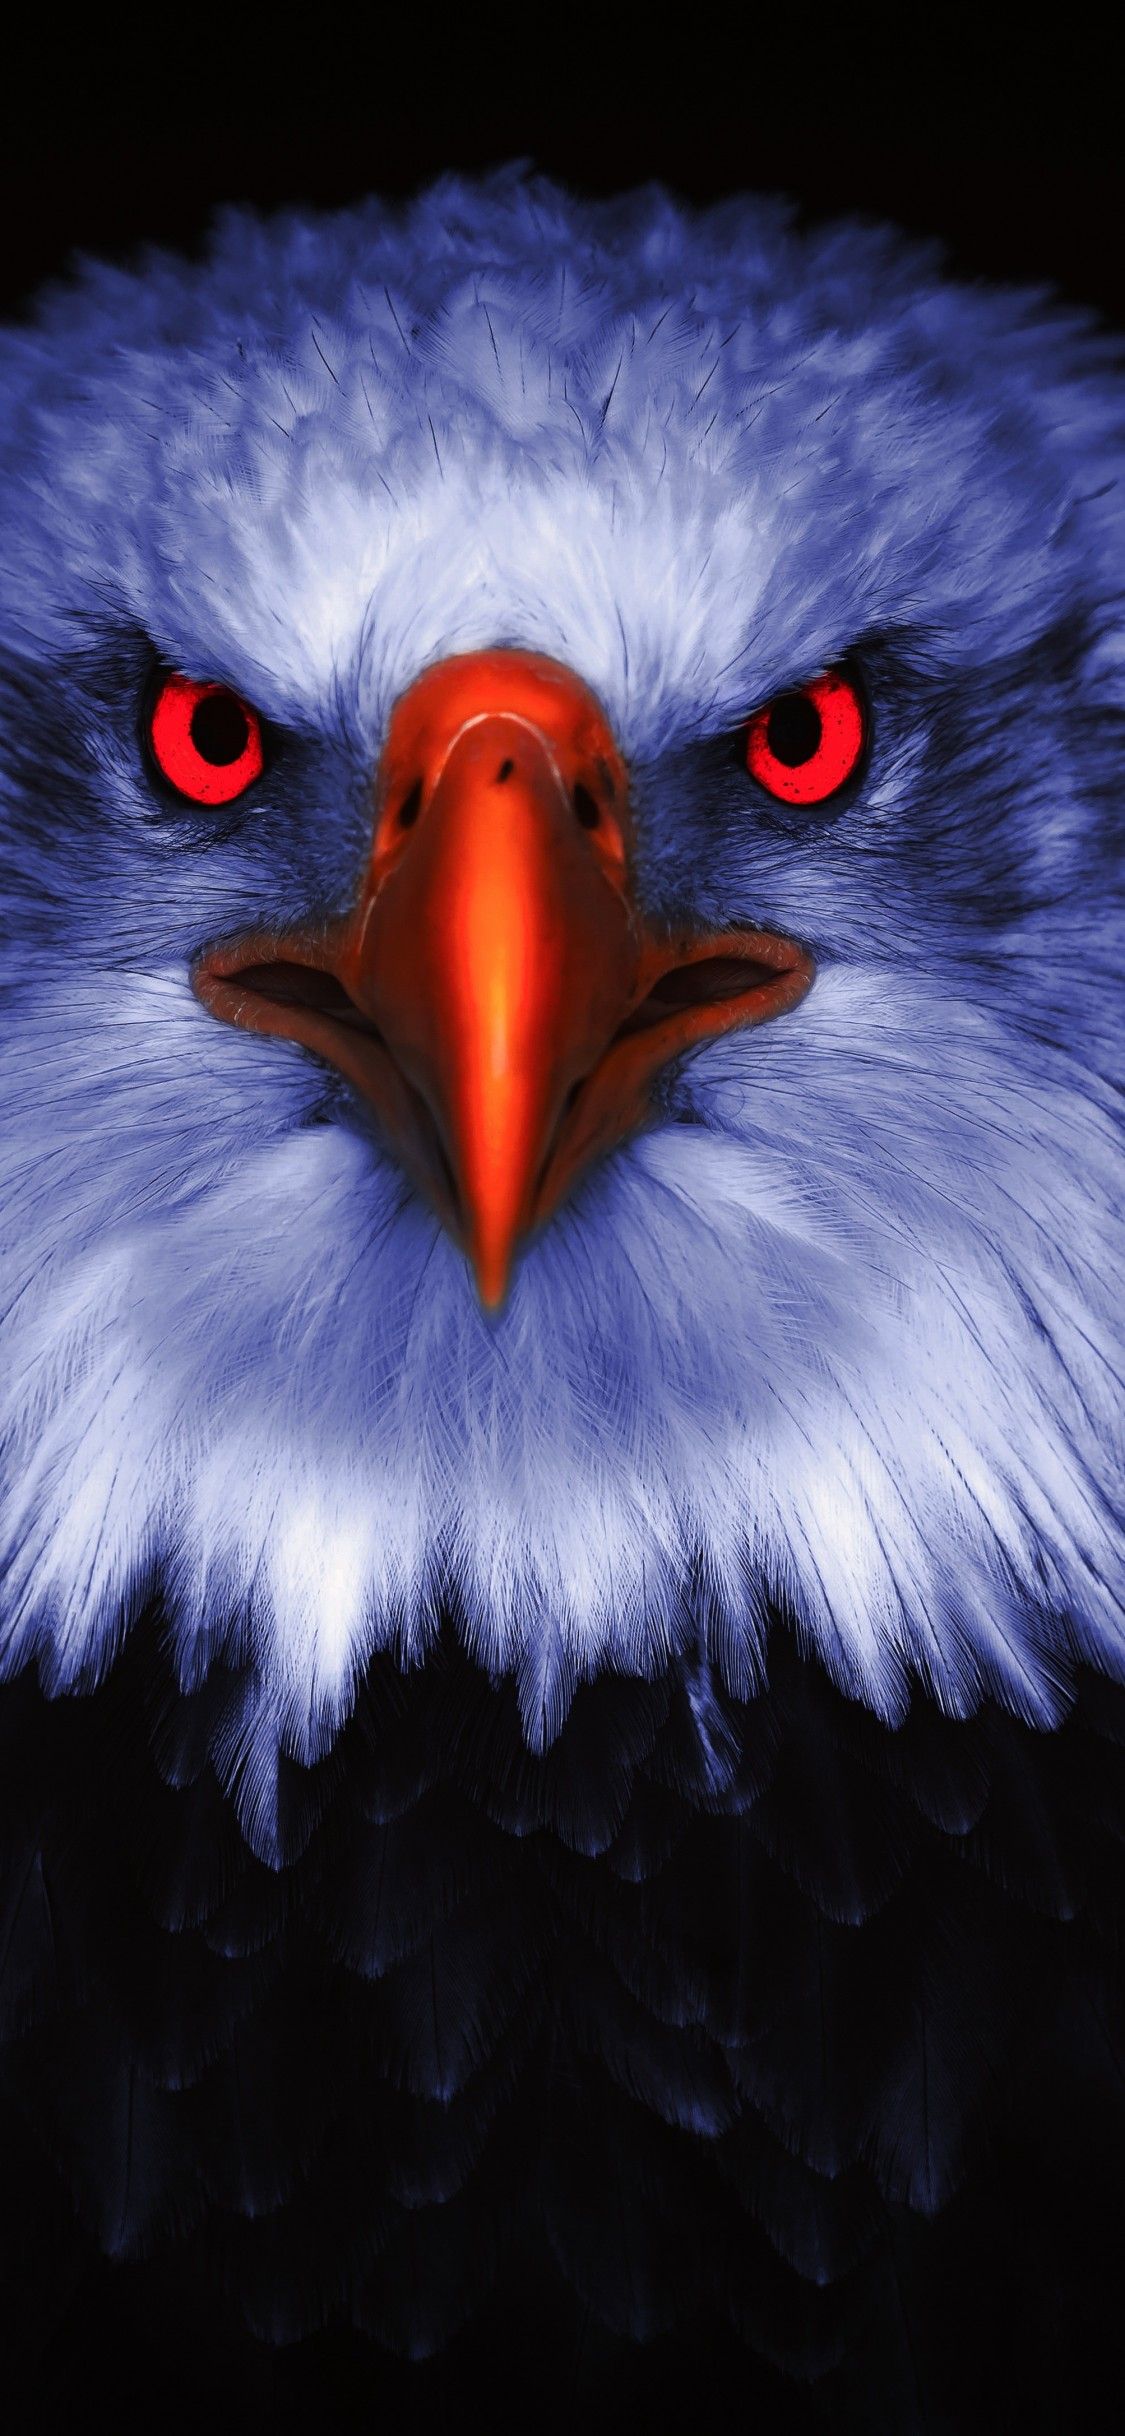 Eagle iPhone 4k Wallpapers - Wallpaper Cave